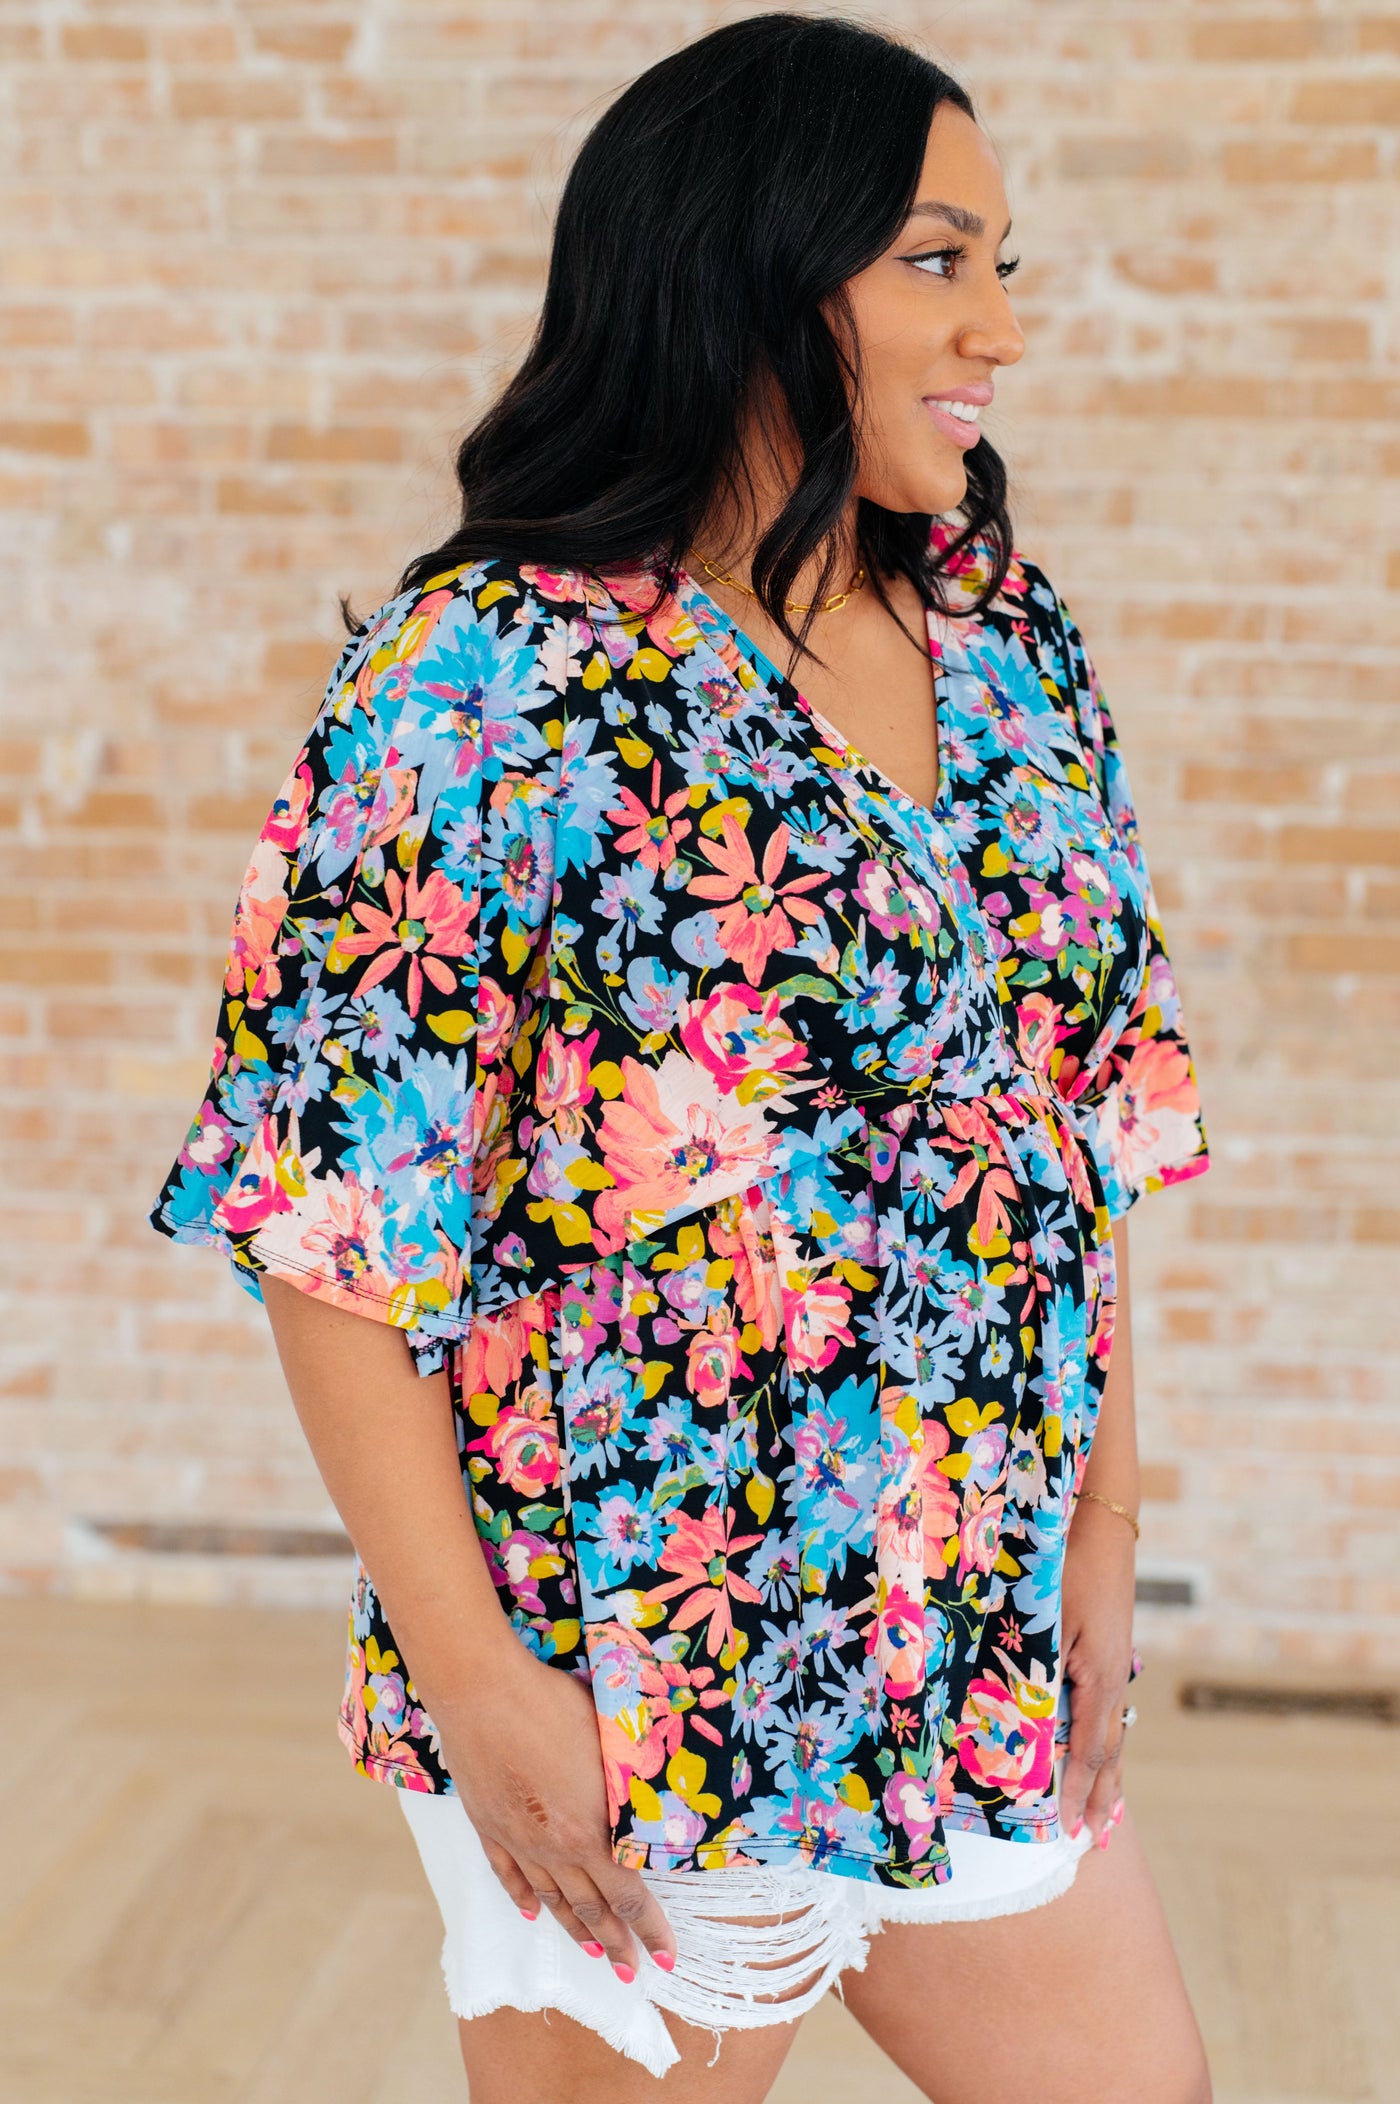 Dreamer Peplum Top in Black Multi Floral Southern Soul Collectives